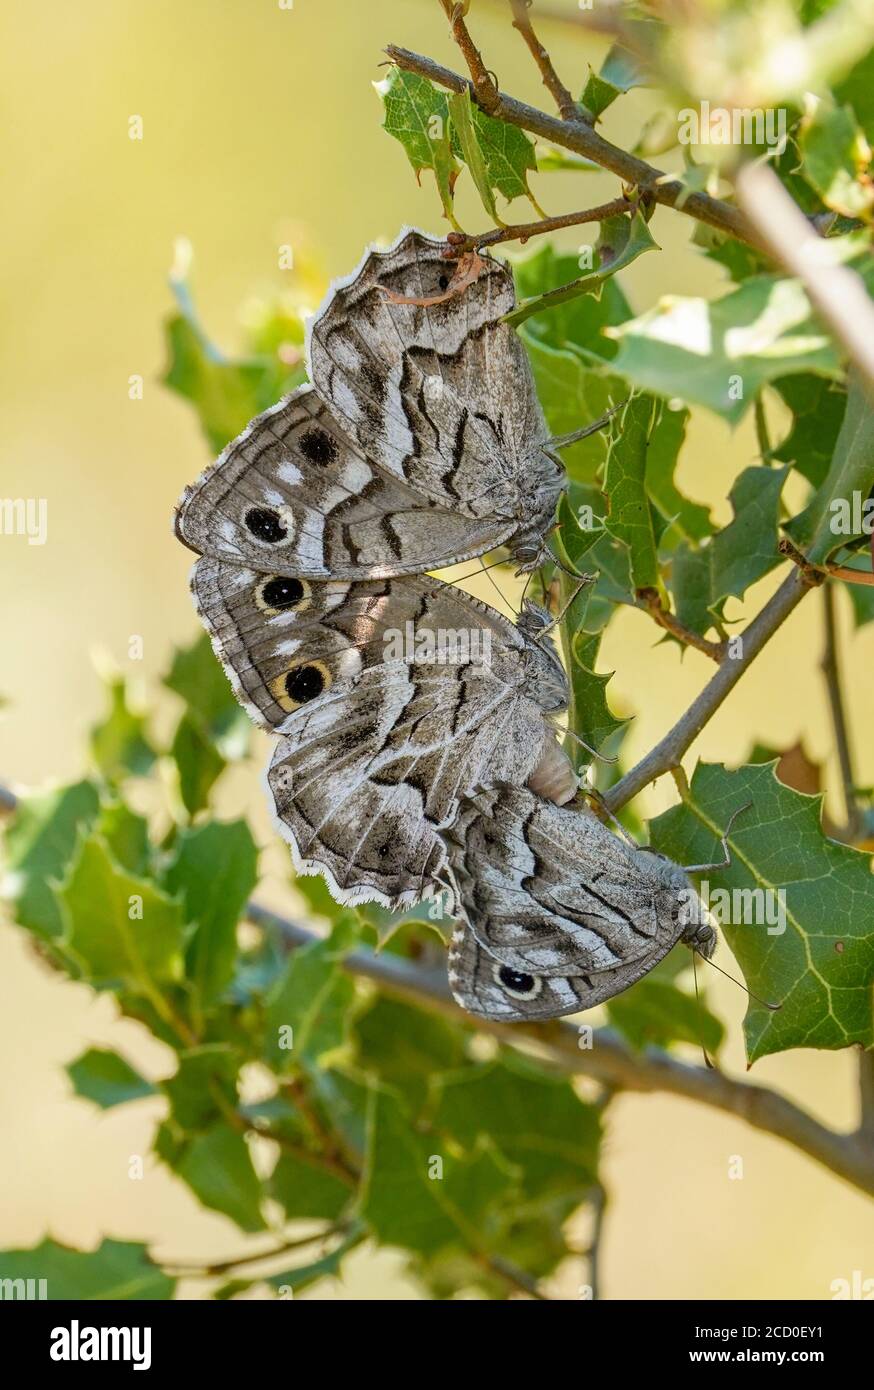 Striped grayling butterflies,  Hipparchia fidia, Courtship behaviour and mating, Andalucia, Spain. Stock Photo